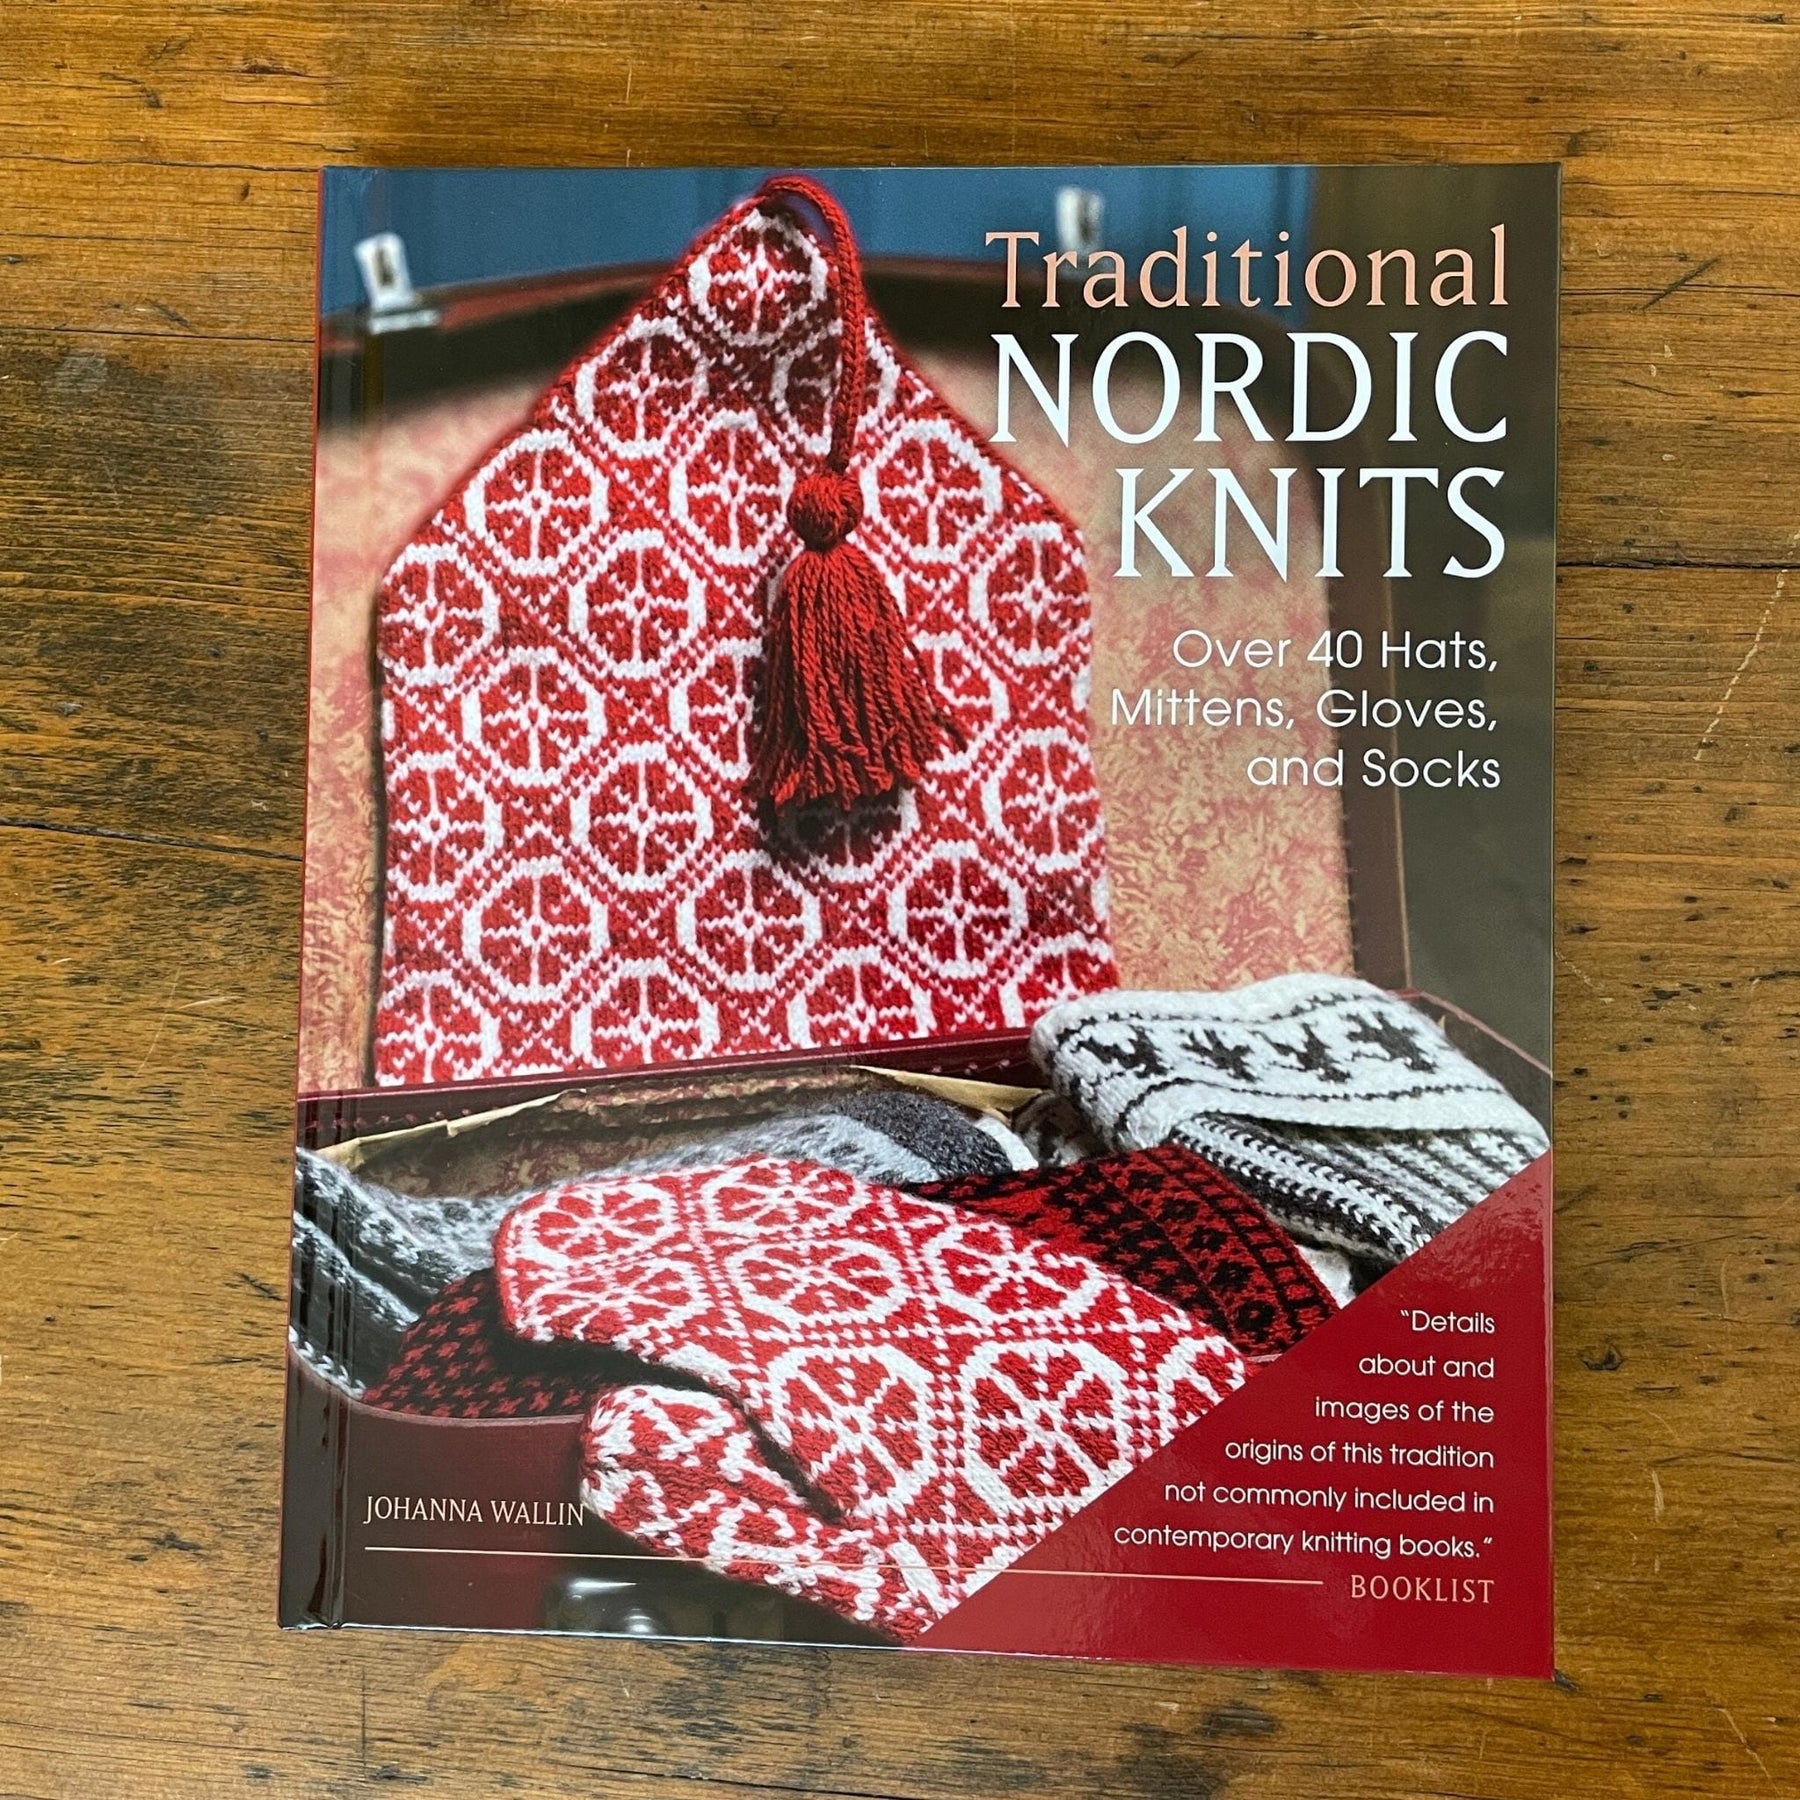 Knits from Around Norway: Over 40 Traditional Knitting Patterns Inspired by  Norwegian Folk-Art Collections